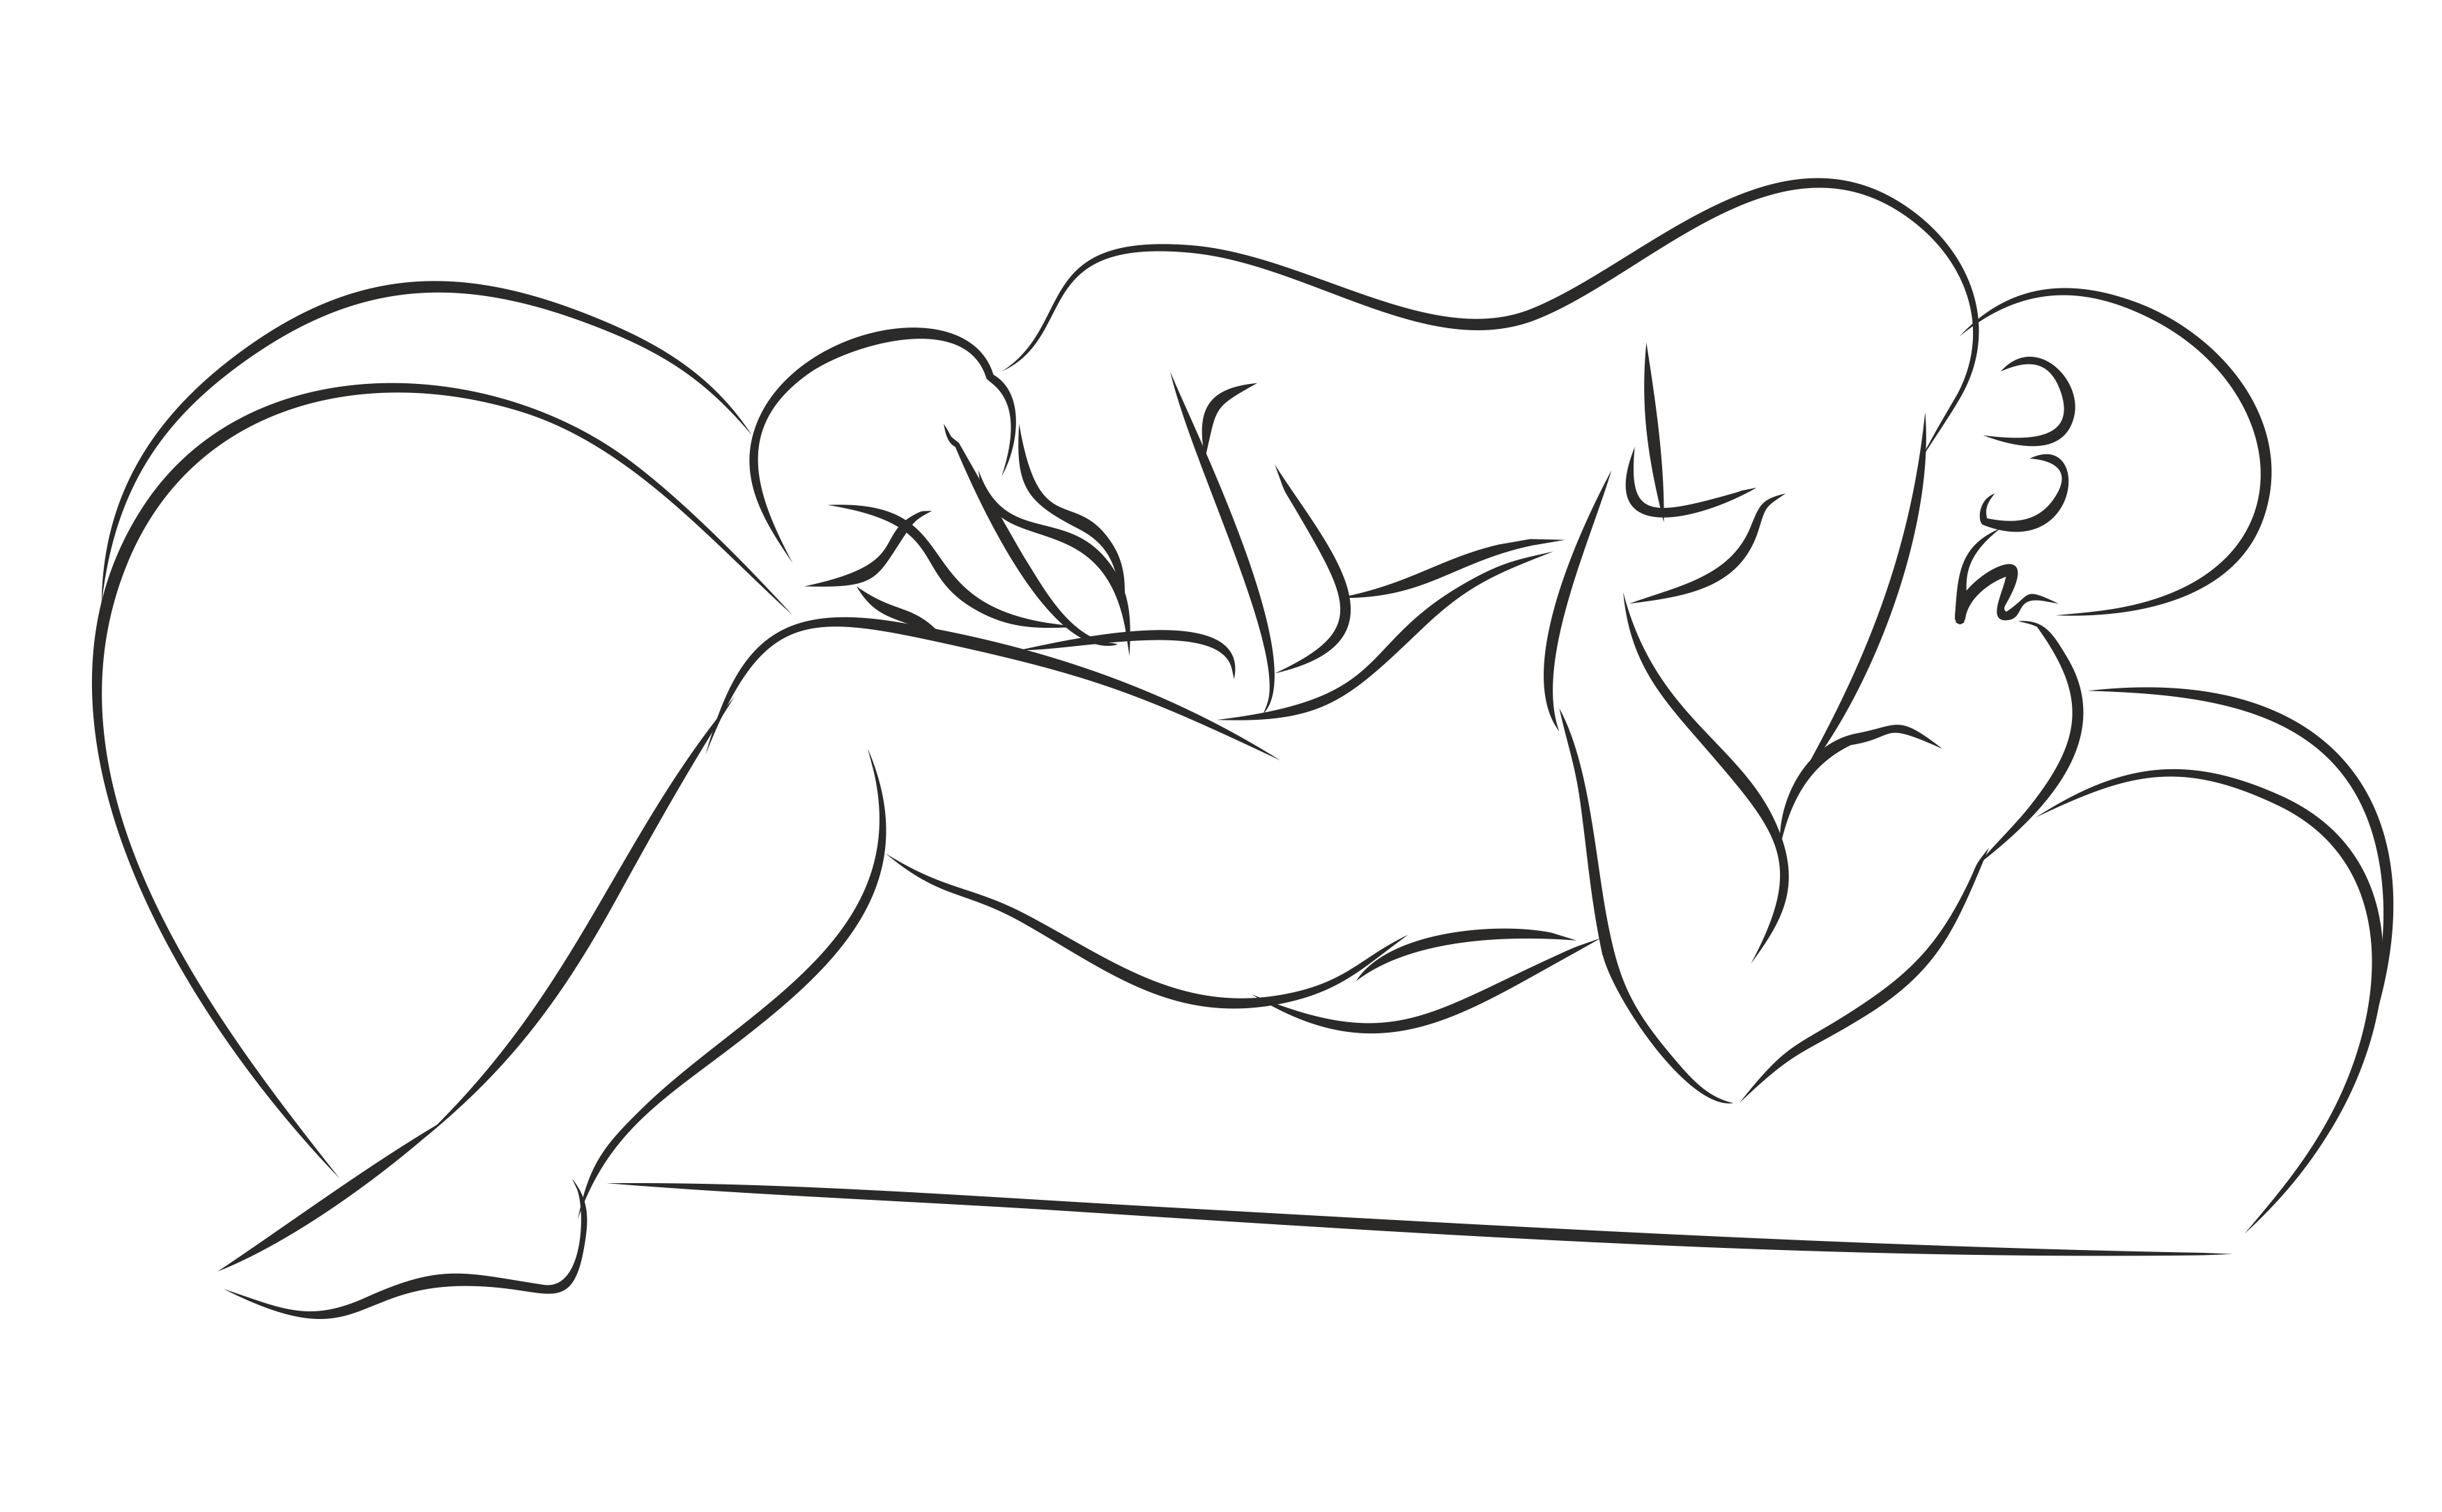 Sex position drawing